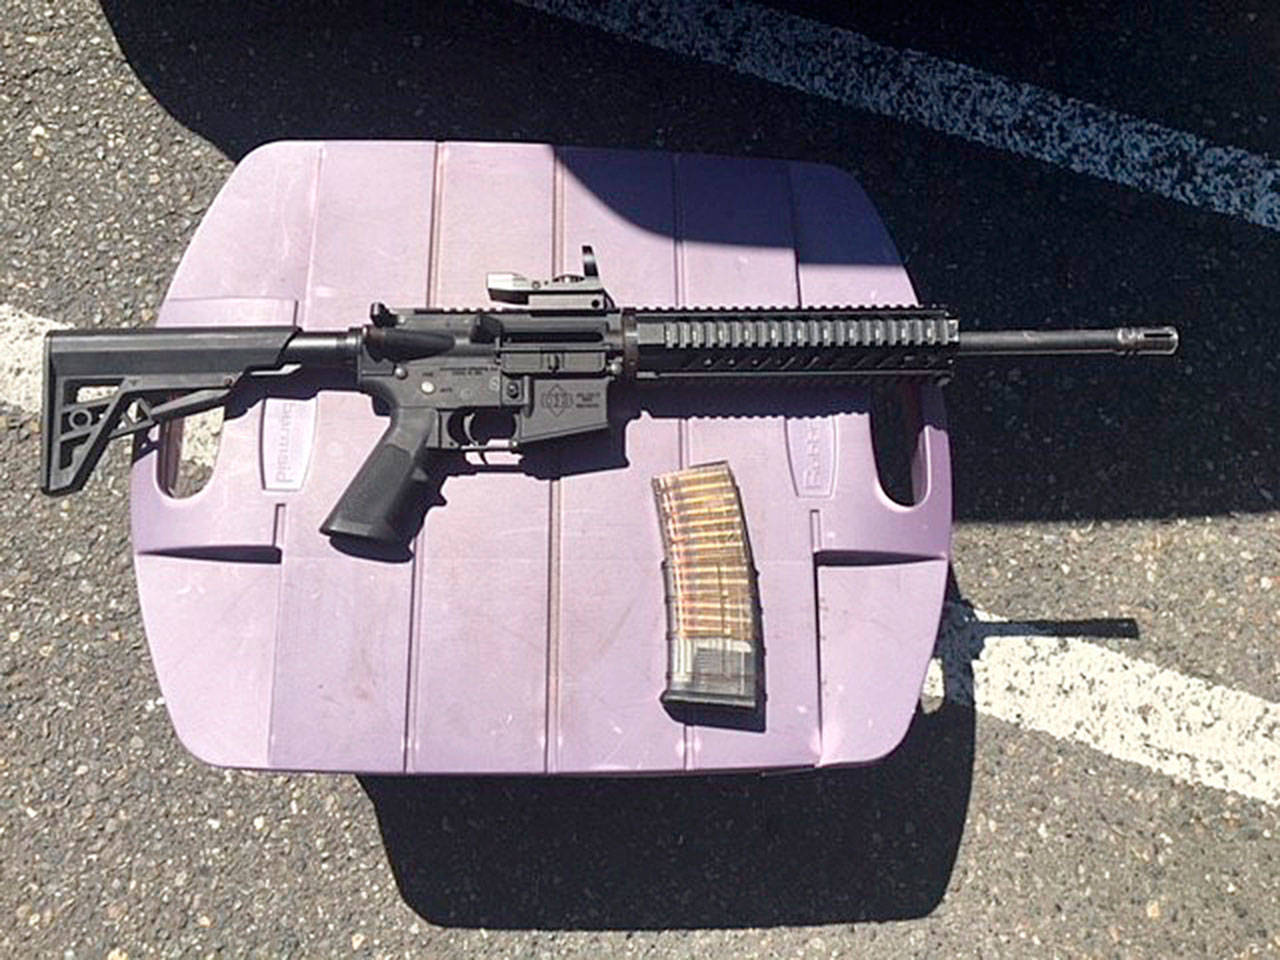 AR-15 rifle and a loaded magazine that were recovered from a suspect in a shooting incident at the Kent Station parking garage. Photo courtesy of King County Sheriff’s Office